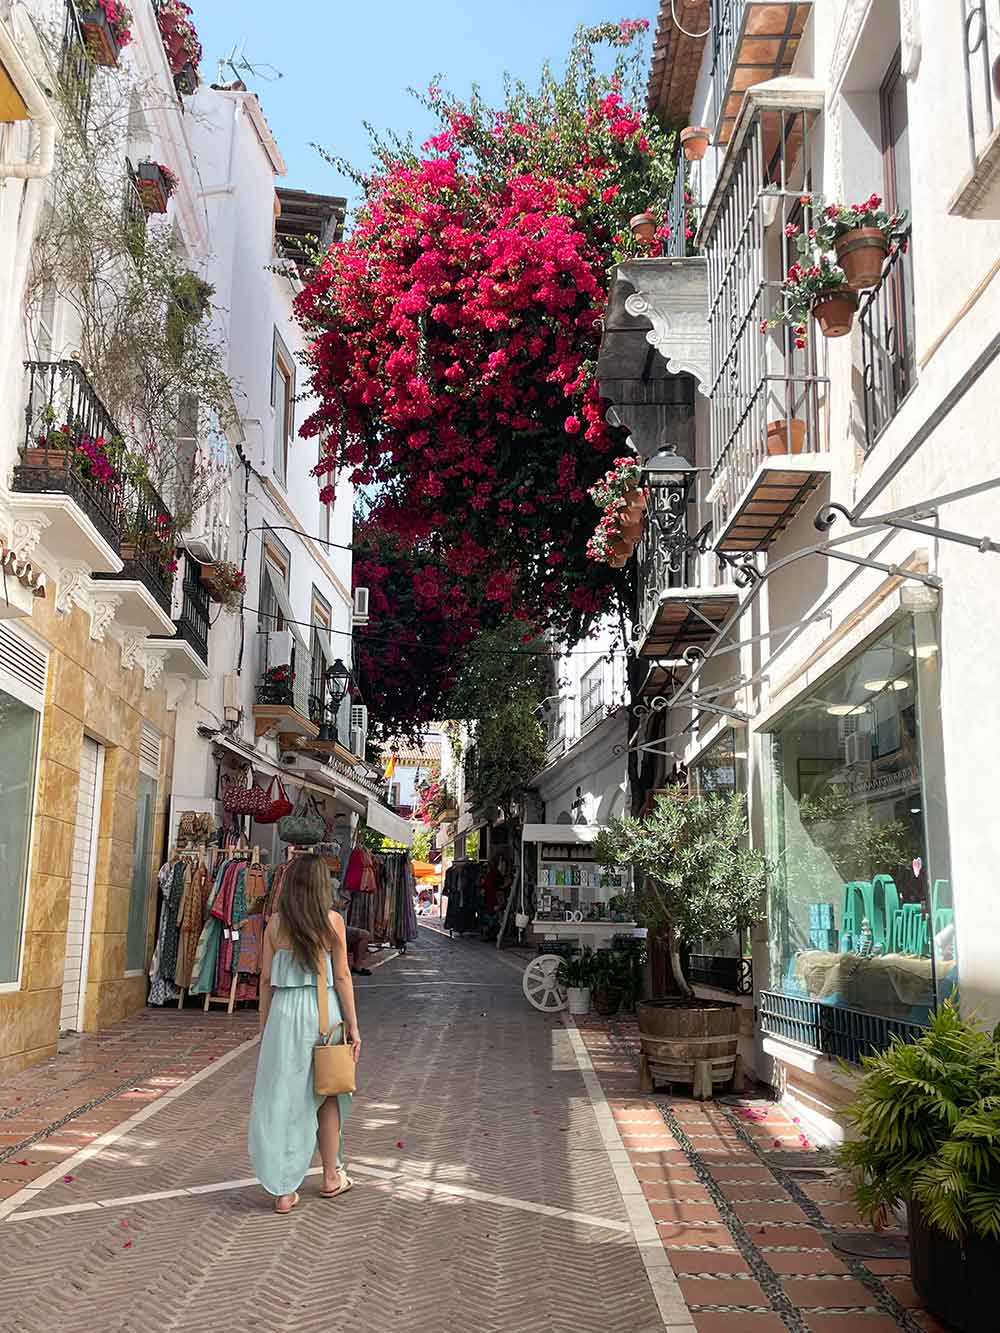 A woman in a light blue dress a walks down a quaint cobblestone street lined with white-walled shops and pink bougainvillea cascading from an upper balcony in Marbella Old Town